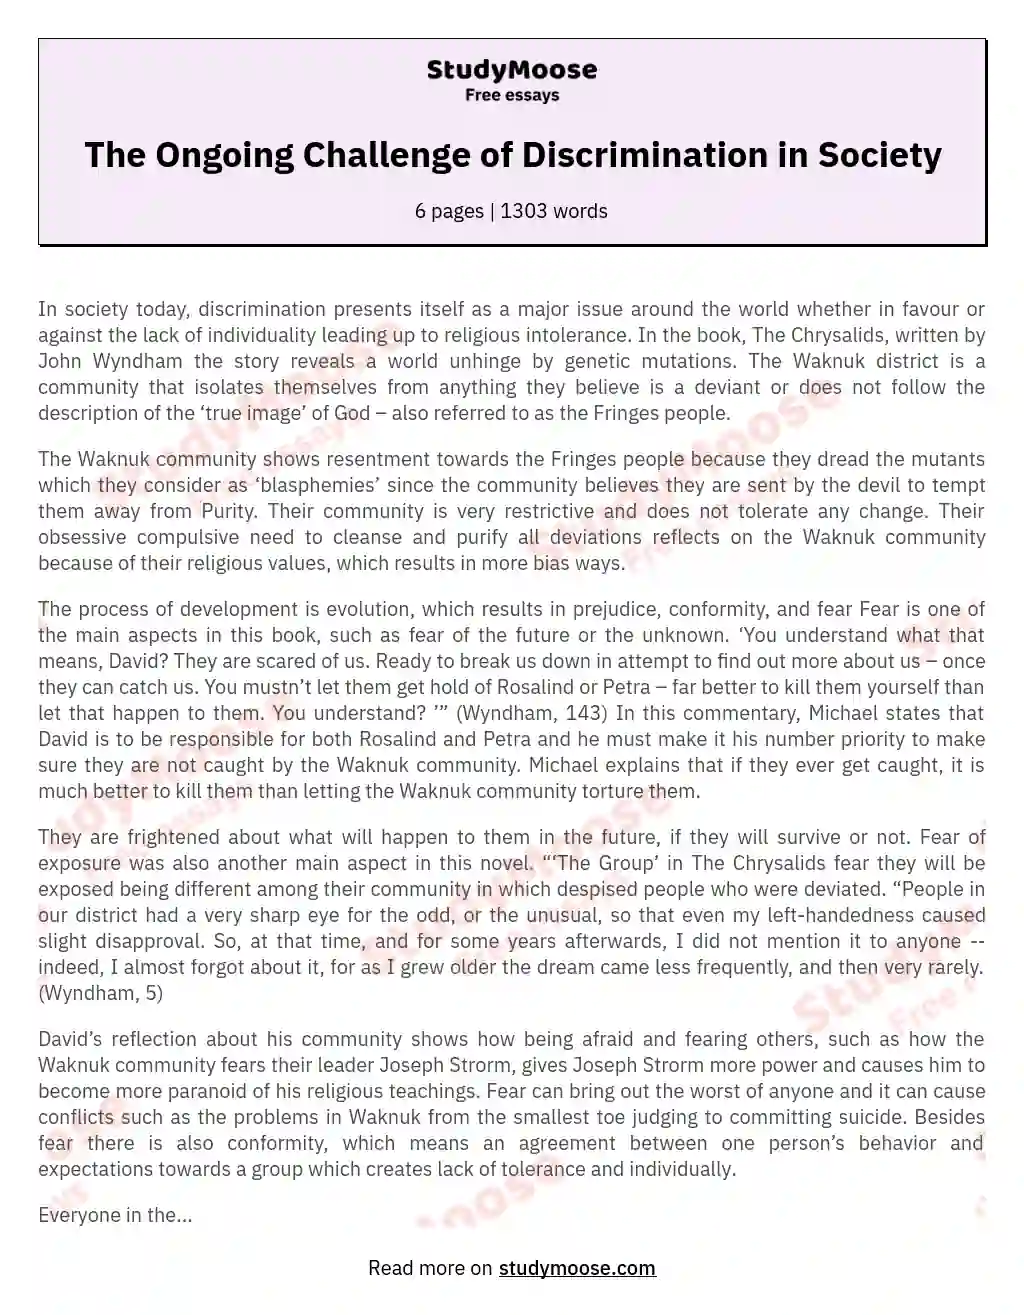 The Ongoing Challenge of Discrimination in Society essay